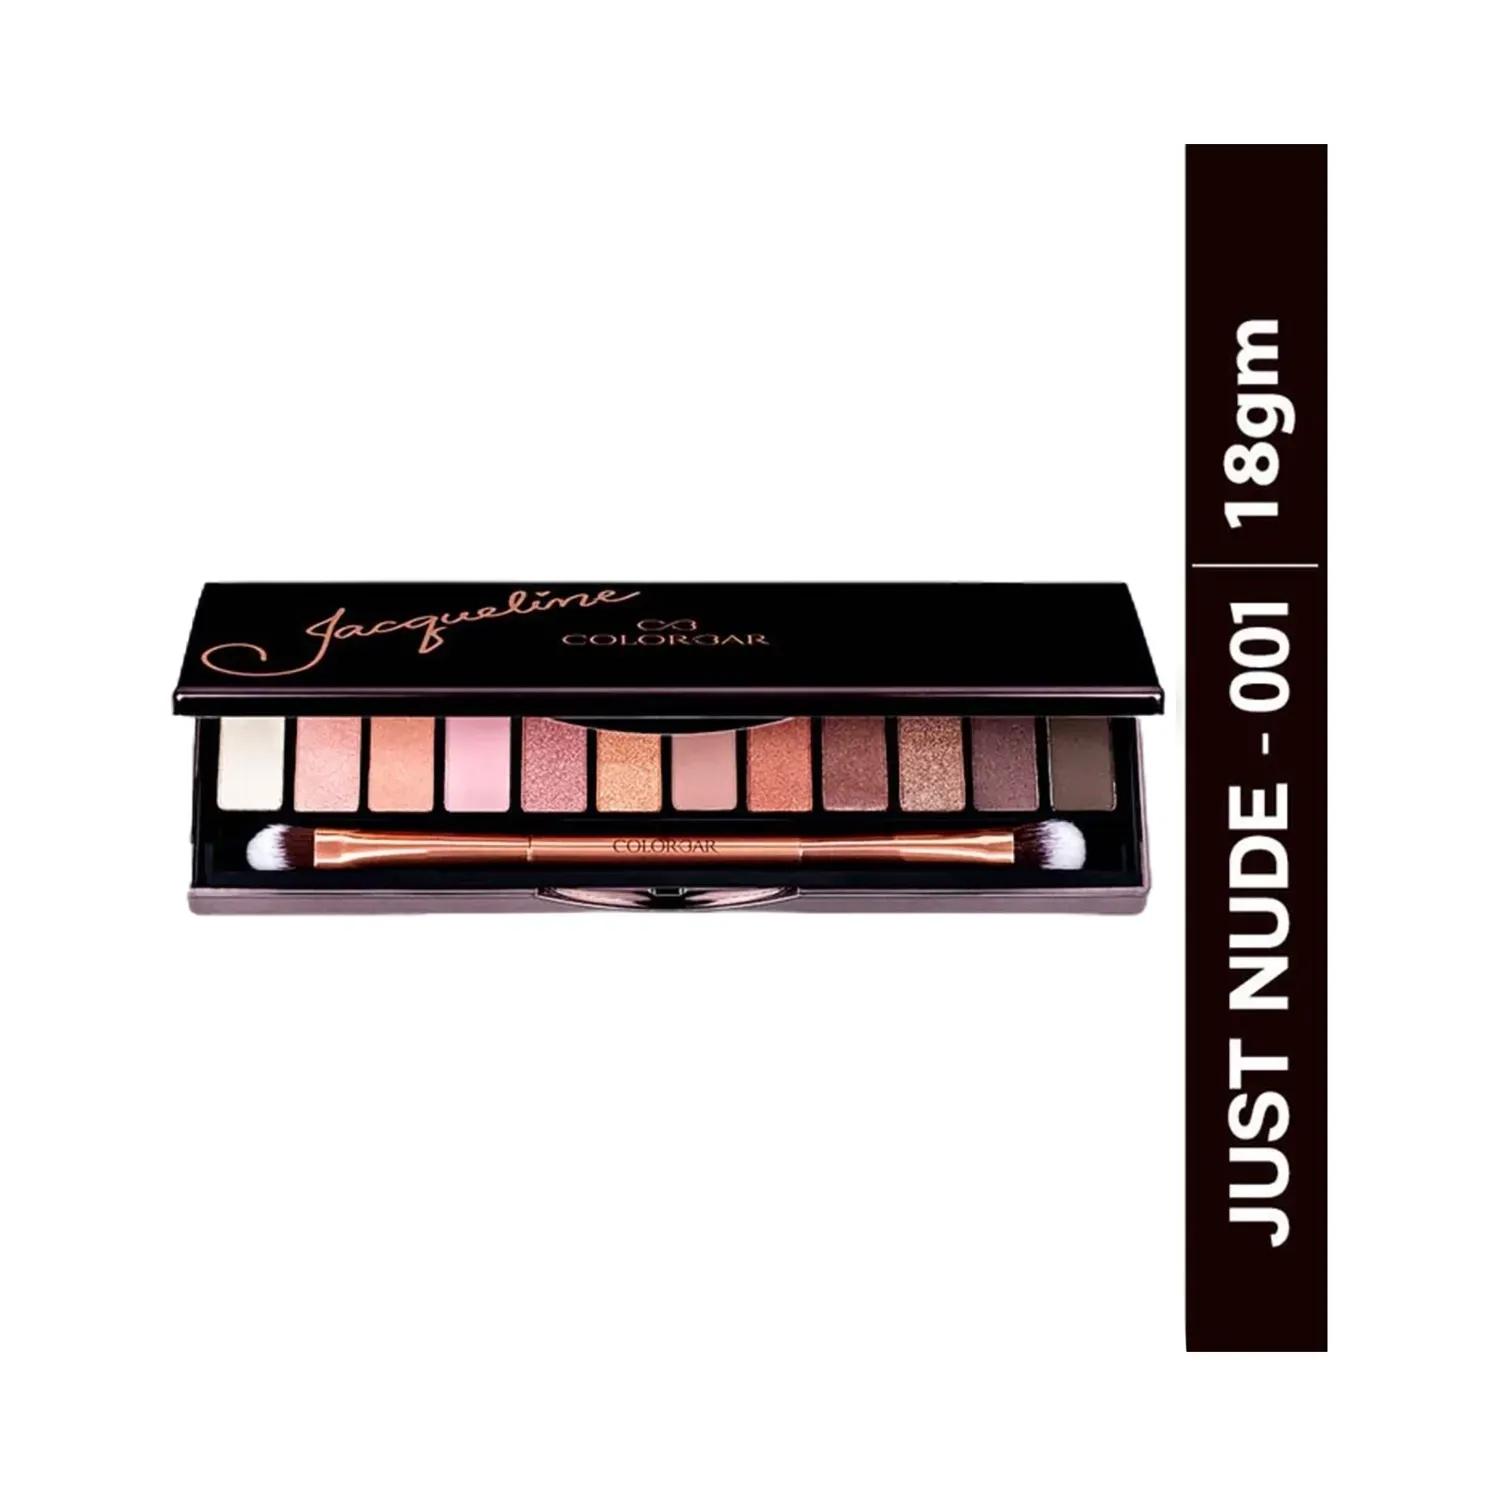 Colorbar Jacqueline Eyeshadow Palette - 001 Just Nude (18g)